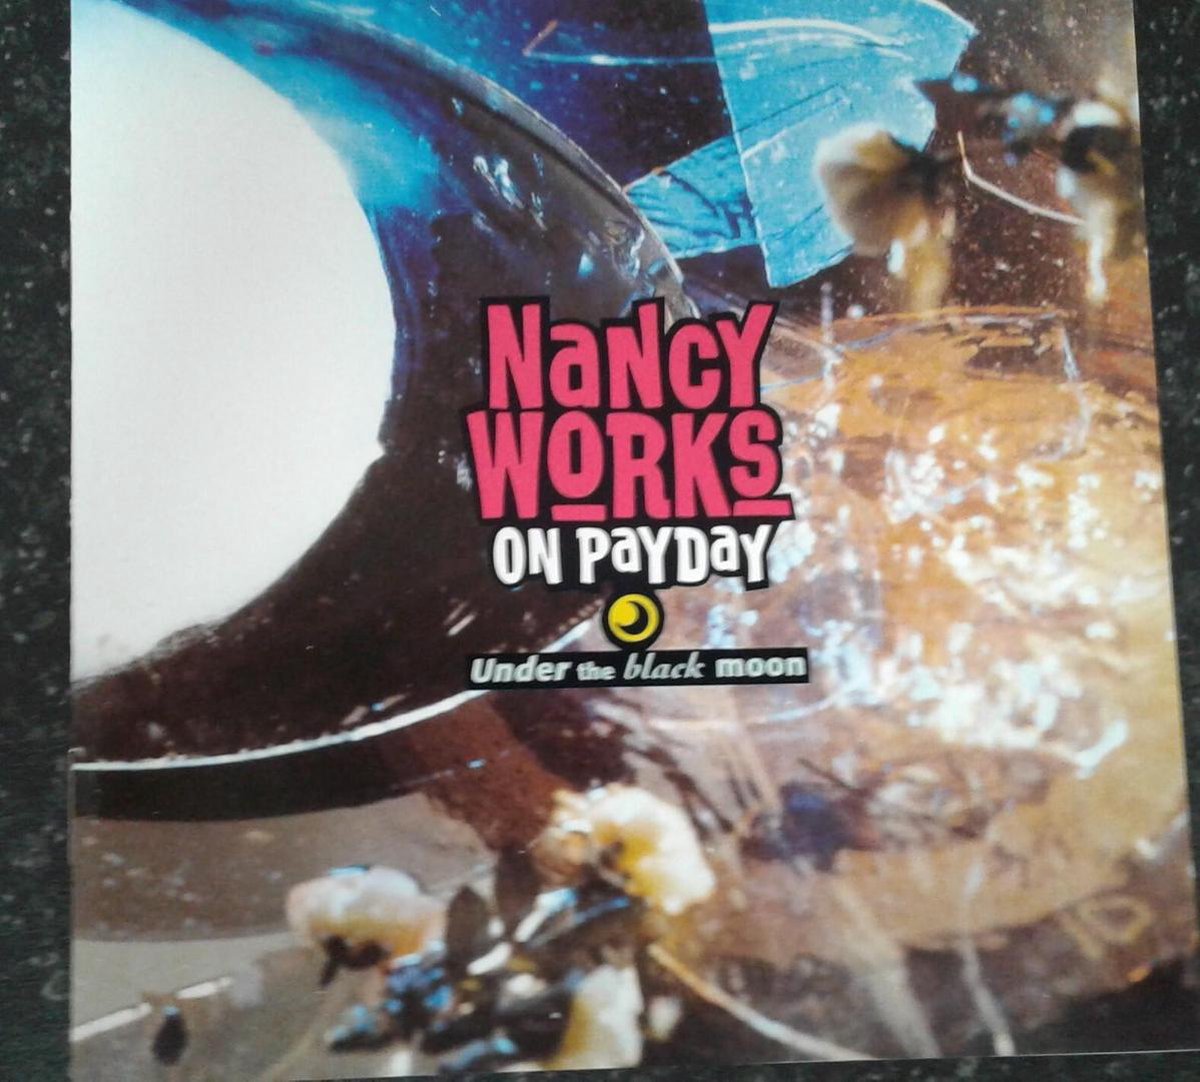 Nancy Works on Payday - Under the black moon - Nancy works on payday